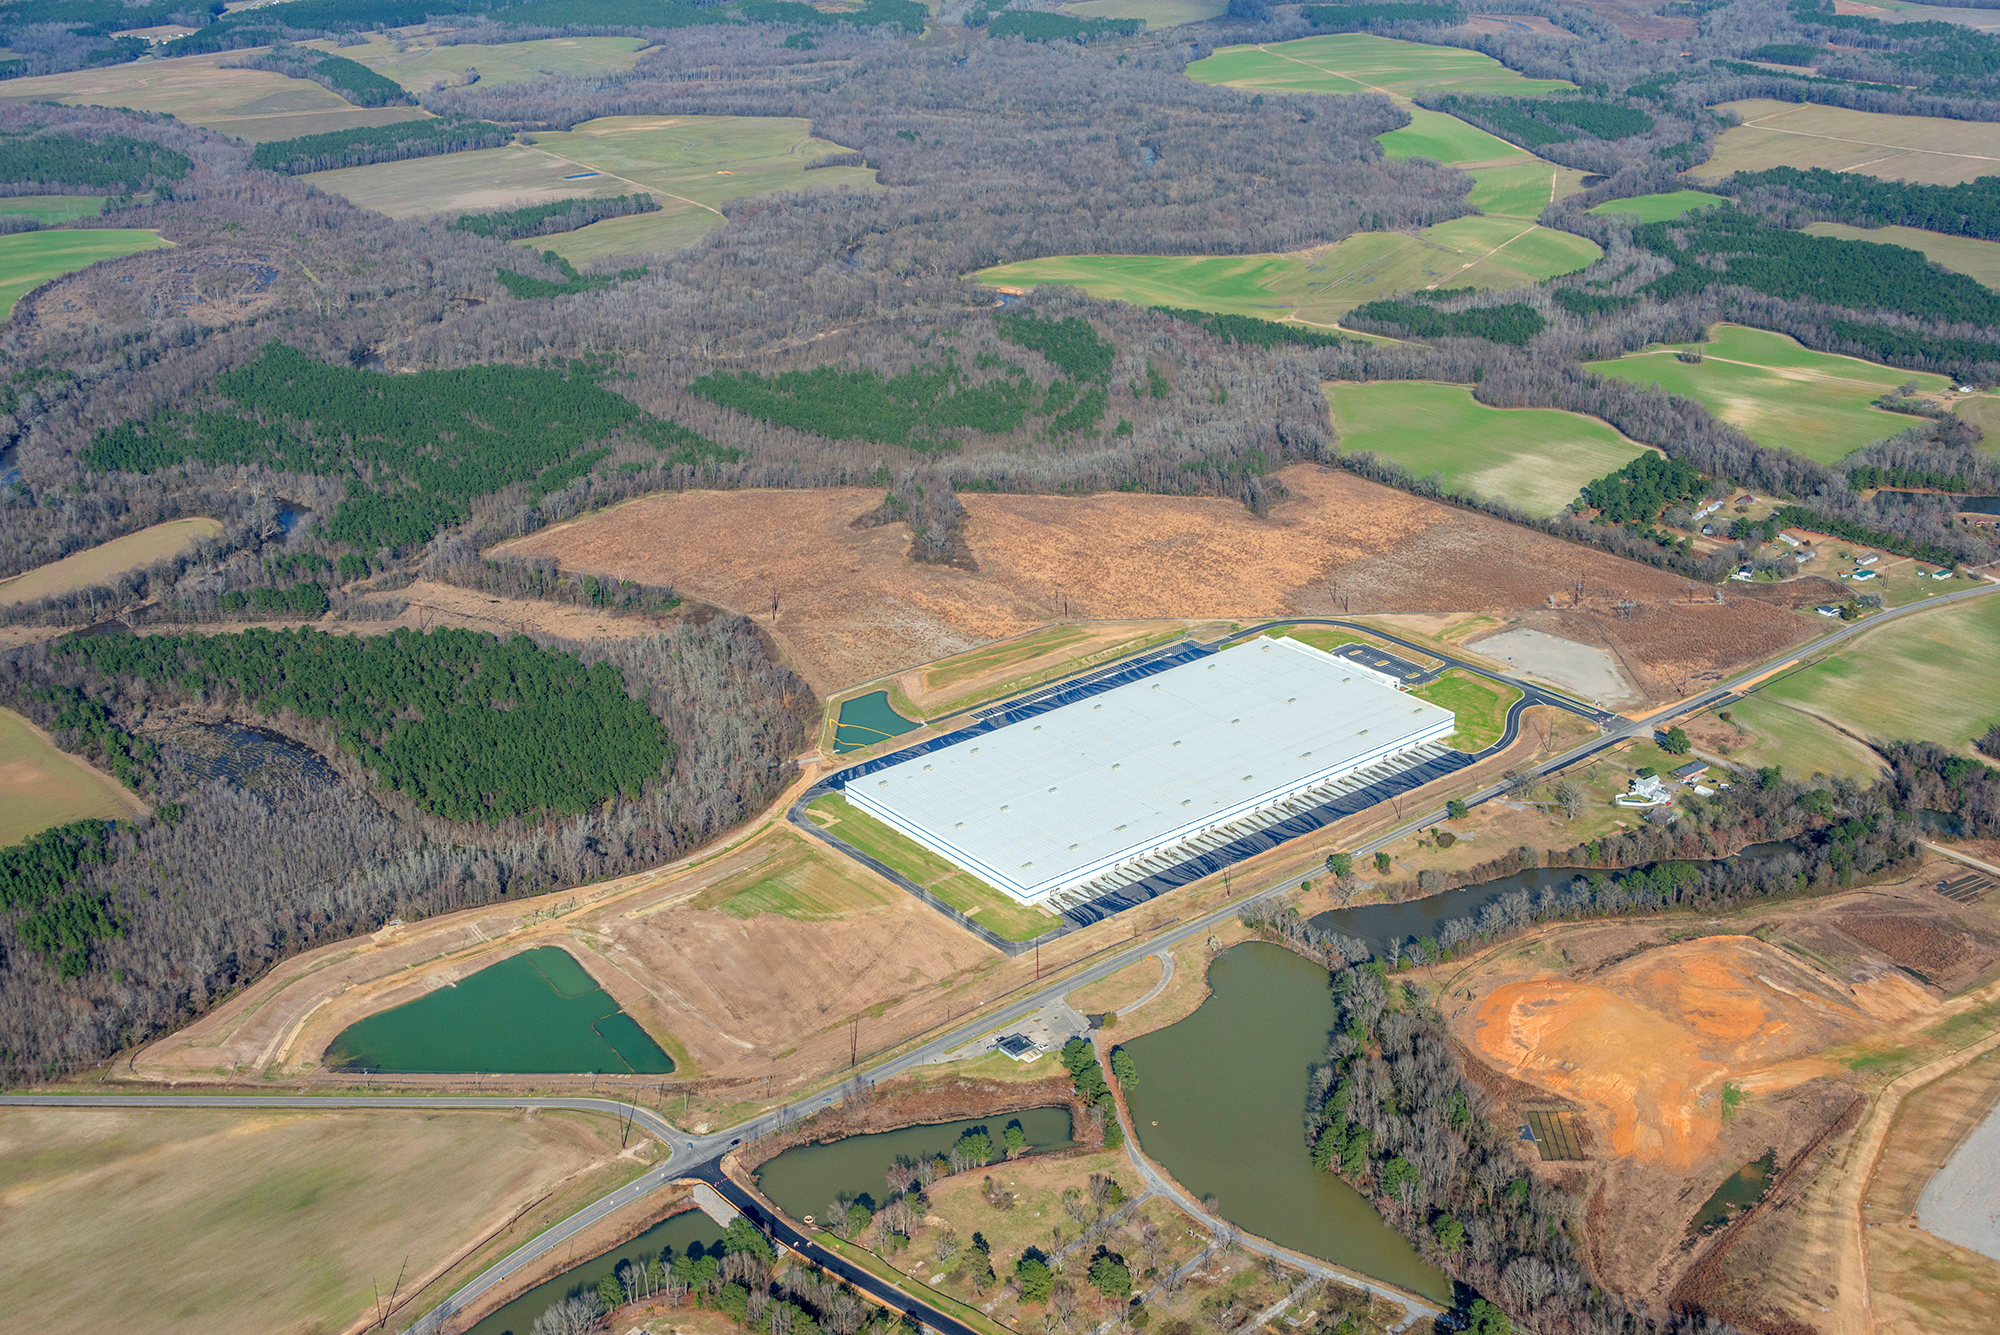 An aerial shot of a large distribution warehouse, access roads, and detention ponds